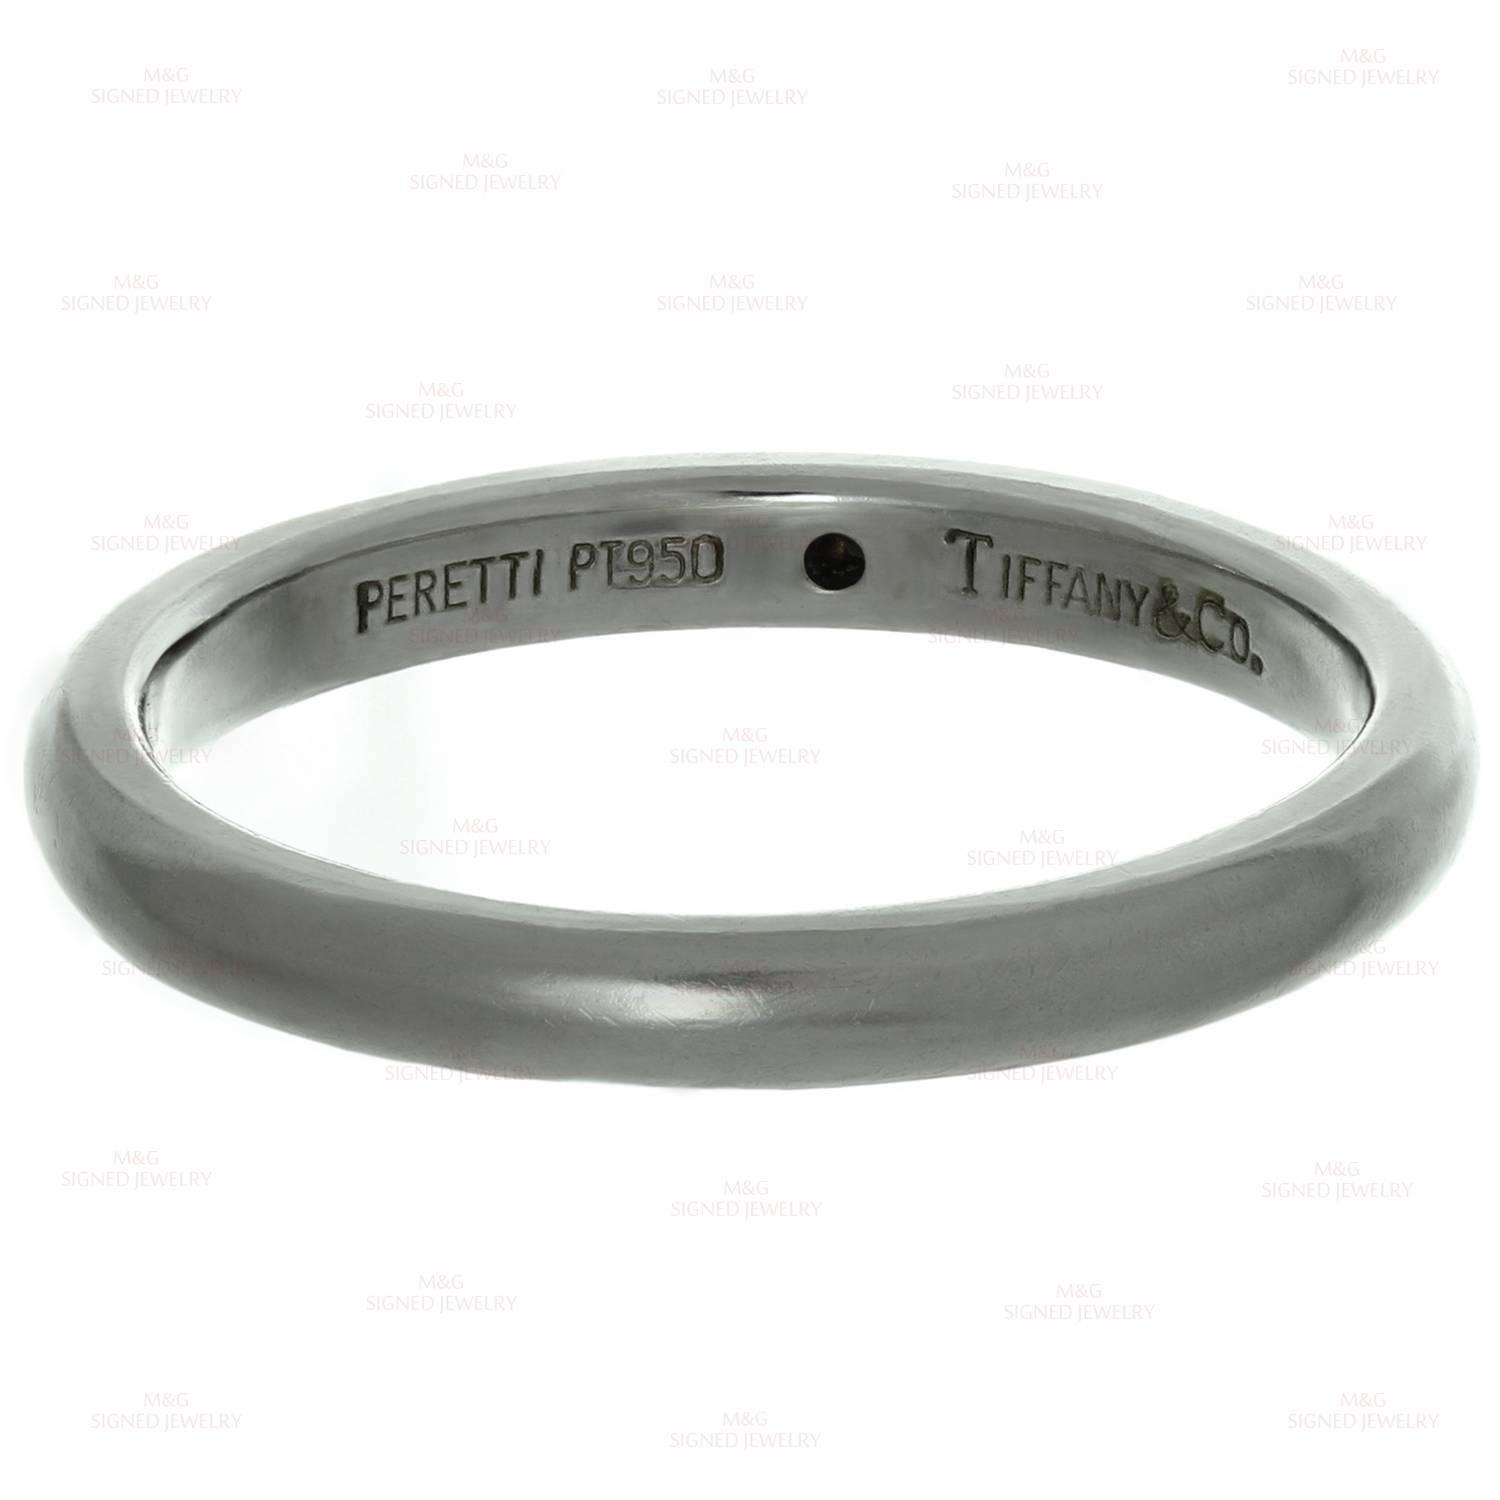 Tiffany & Co. Peretti Solitaire Diamond Platinum Band Ring In Excellent Condition For Sale In New York, NY